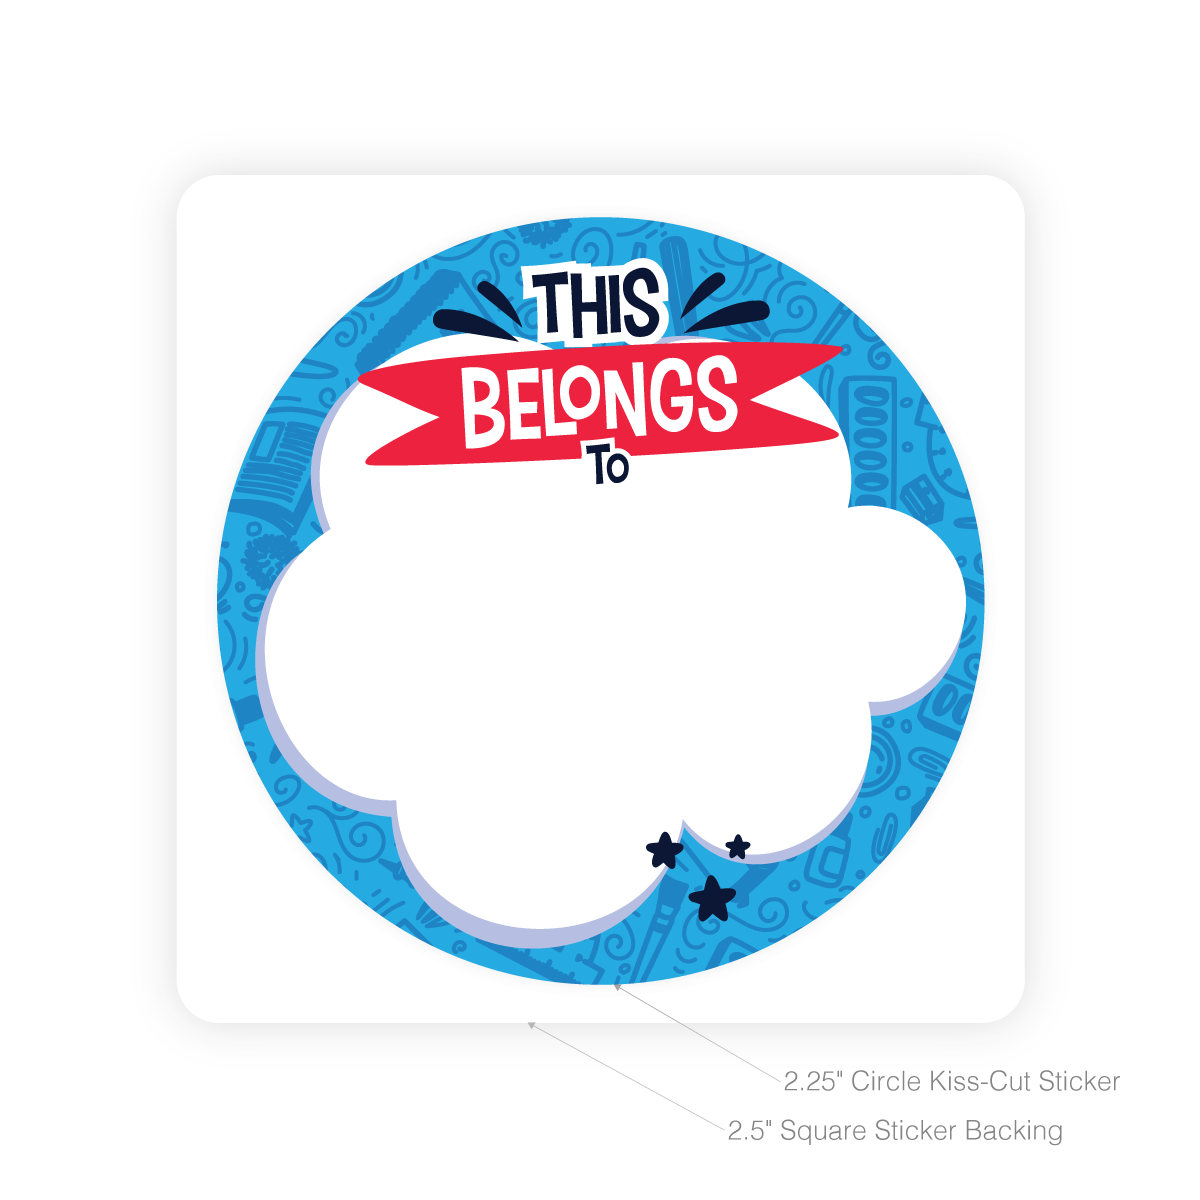 Round Sticker with Writable Space - This Belongs to